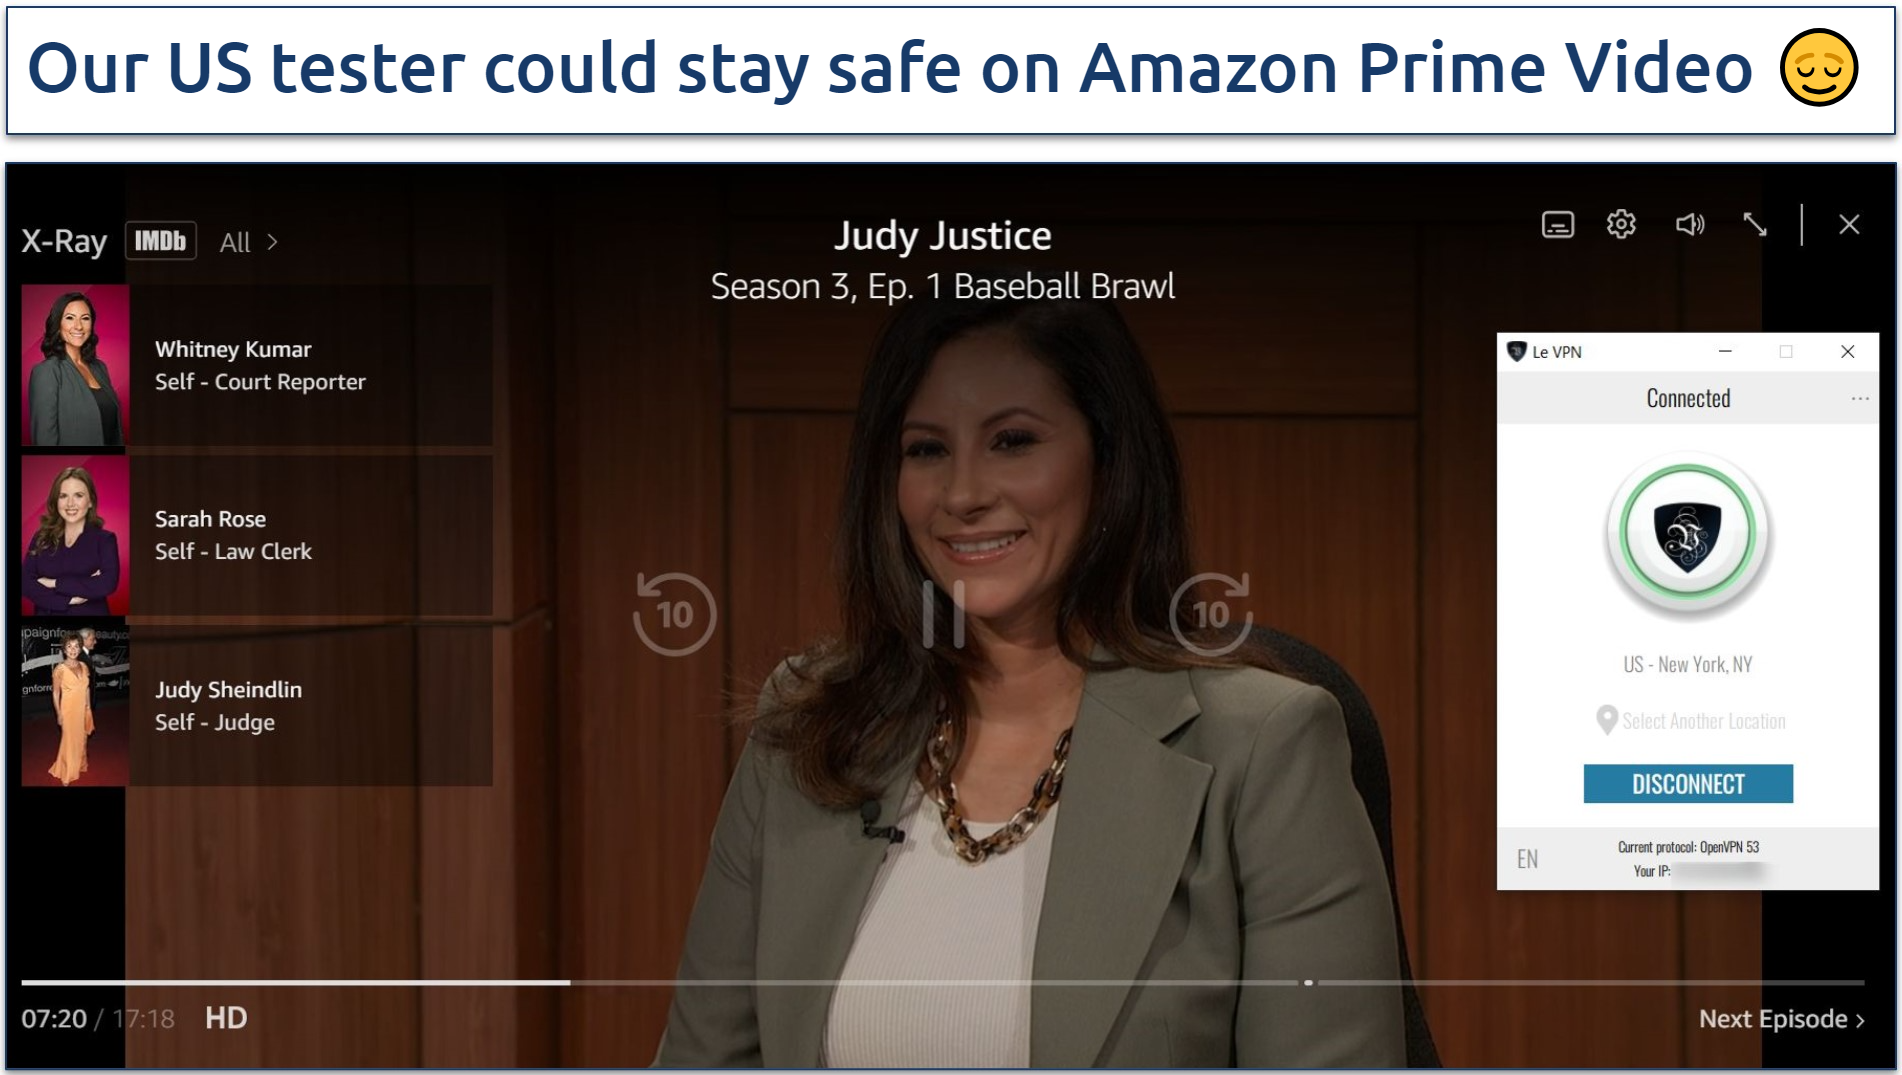 A screenshot of Amazon Prime Video streaming JudyJustice while connected to Le VPN's US server